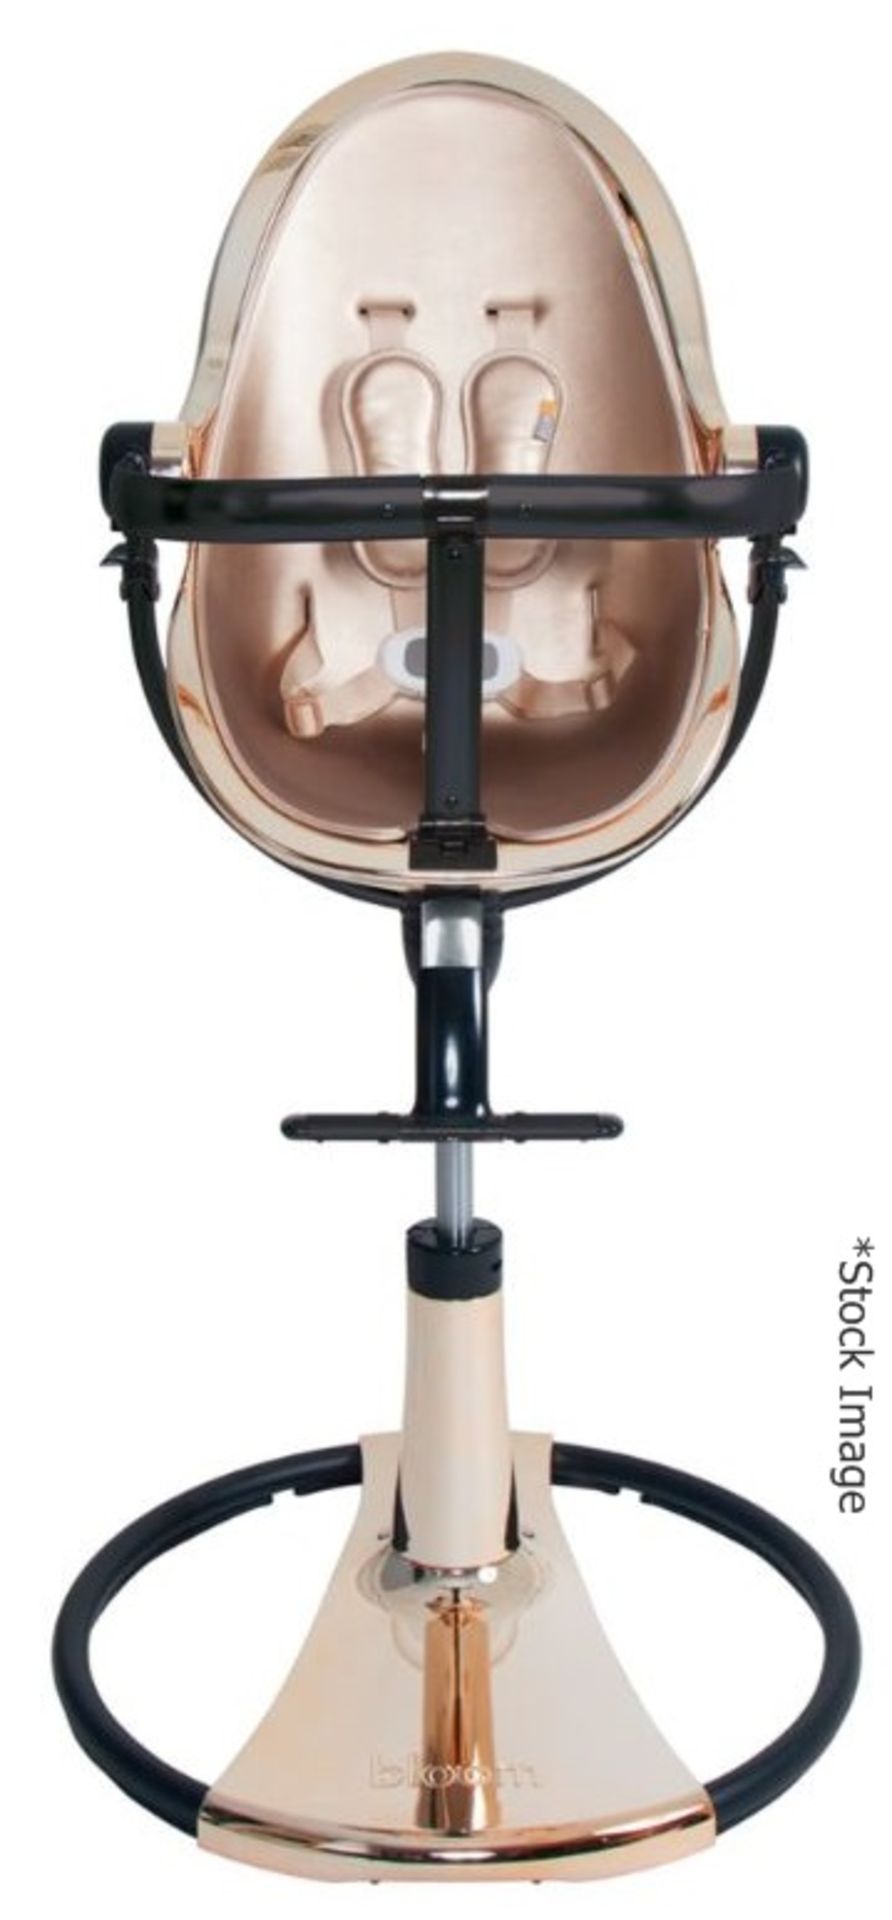 1 x BLOOM 'Fresco' Designer High Chair In A SPECIAL EDITION Rose Gold Finish - Original RRP £695.00 - Image 12 of 14